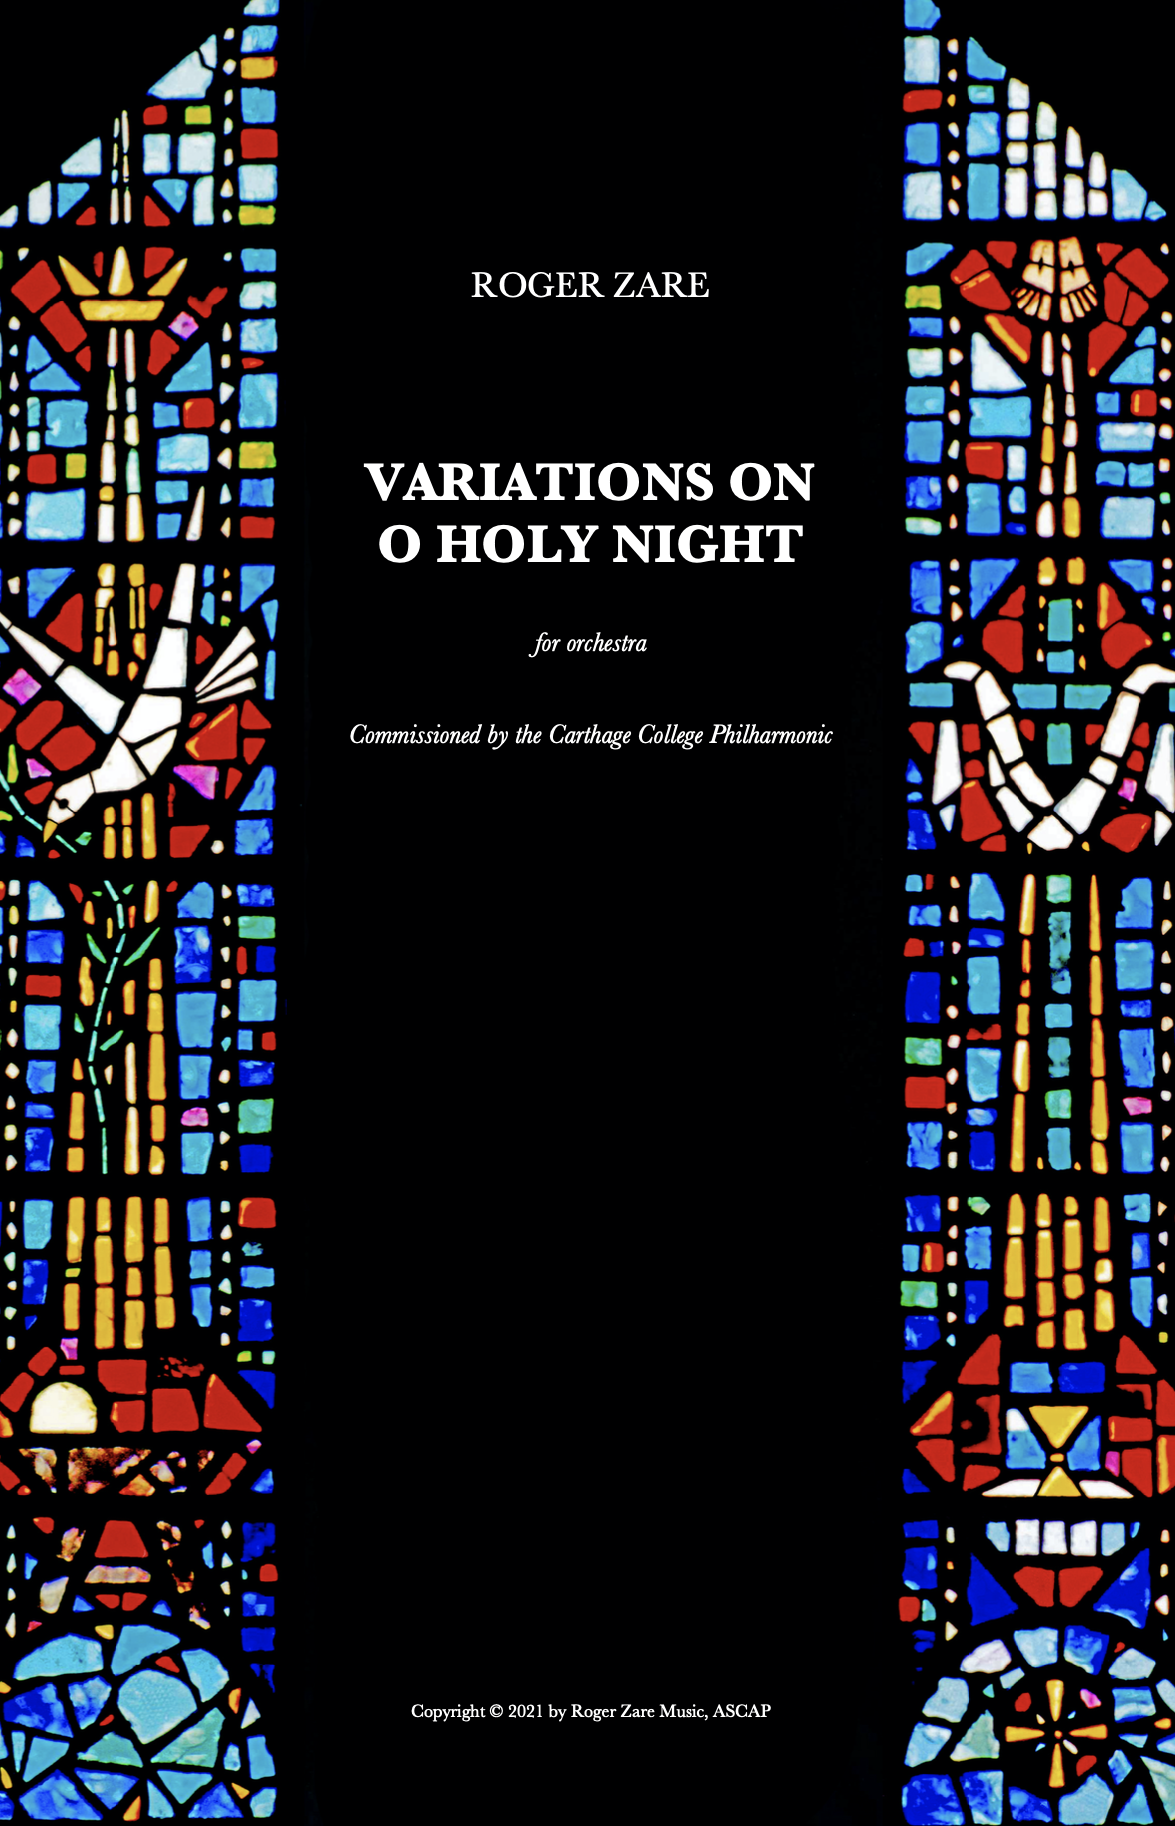 Variations On O Holy Night by Roger Zare